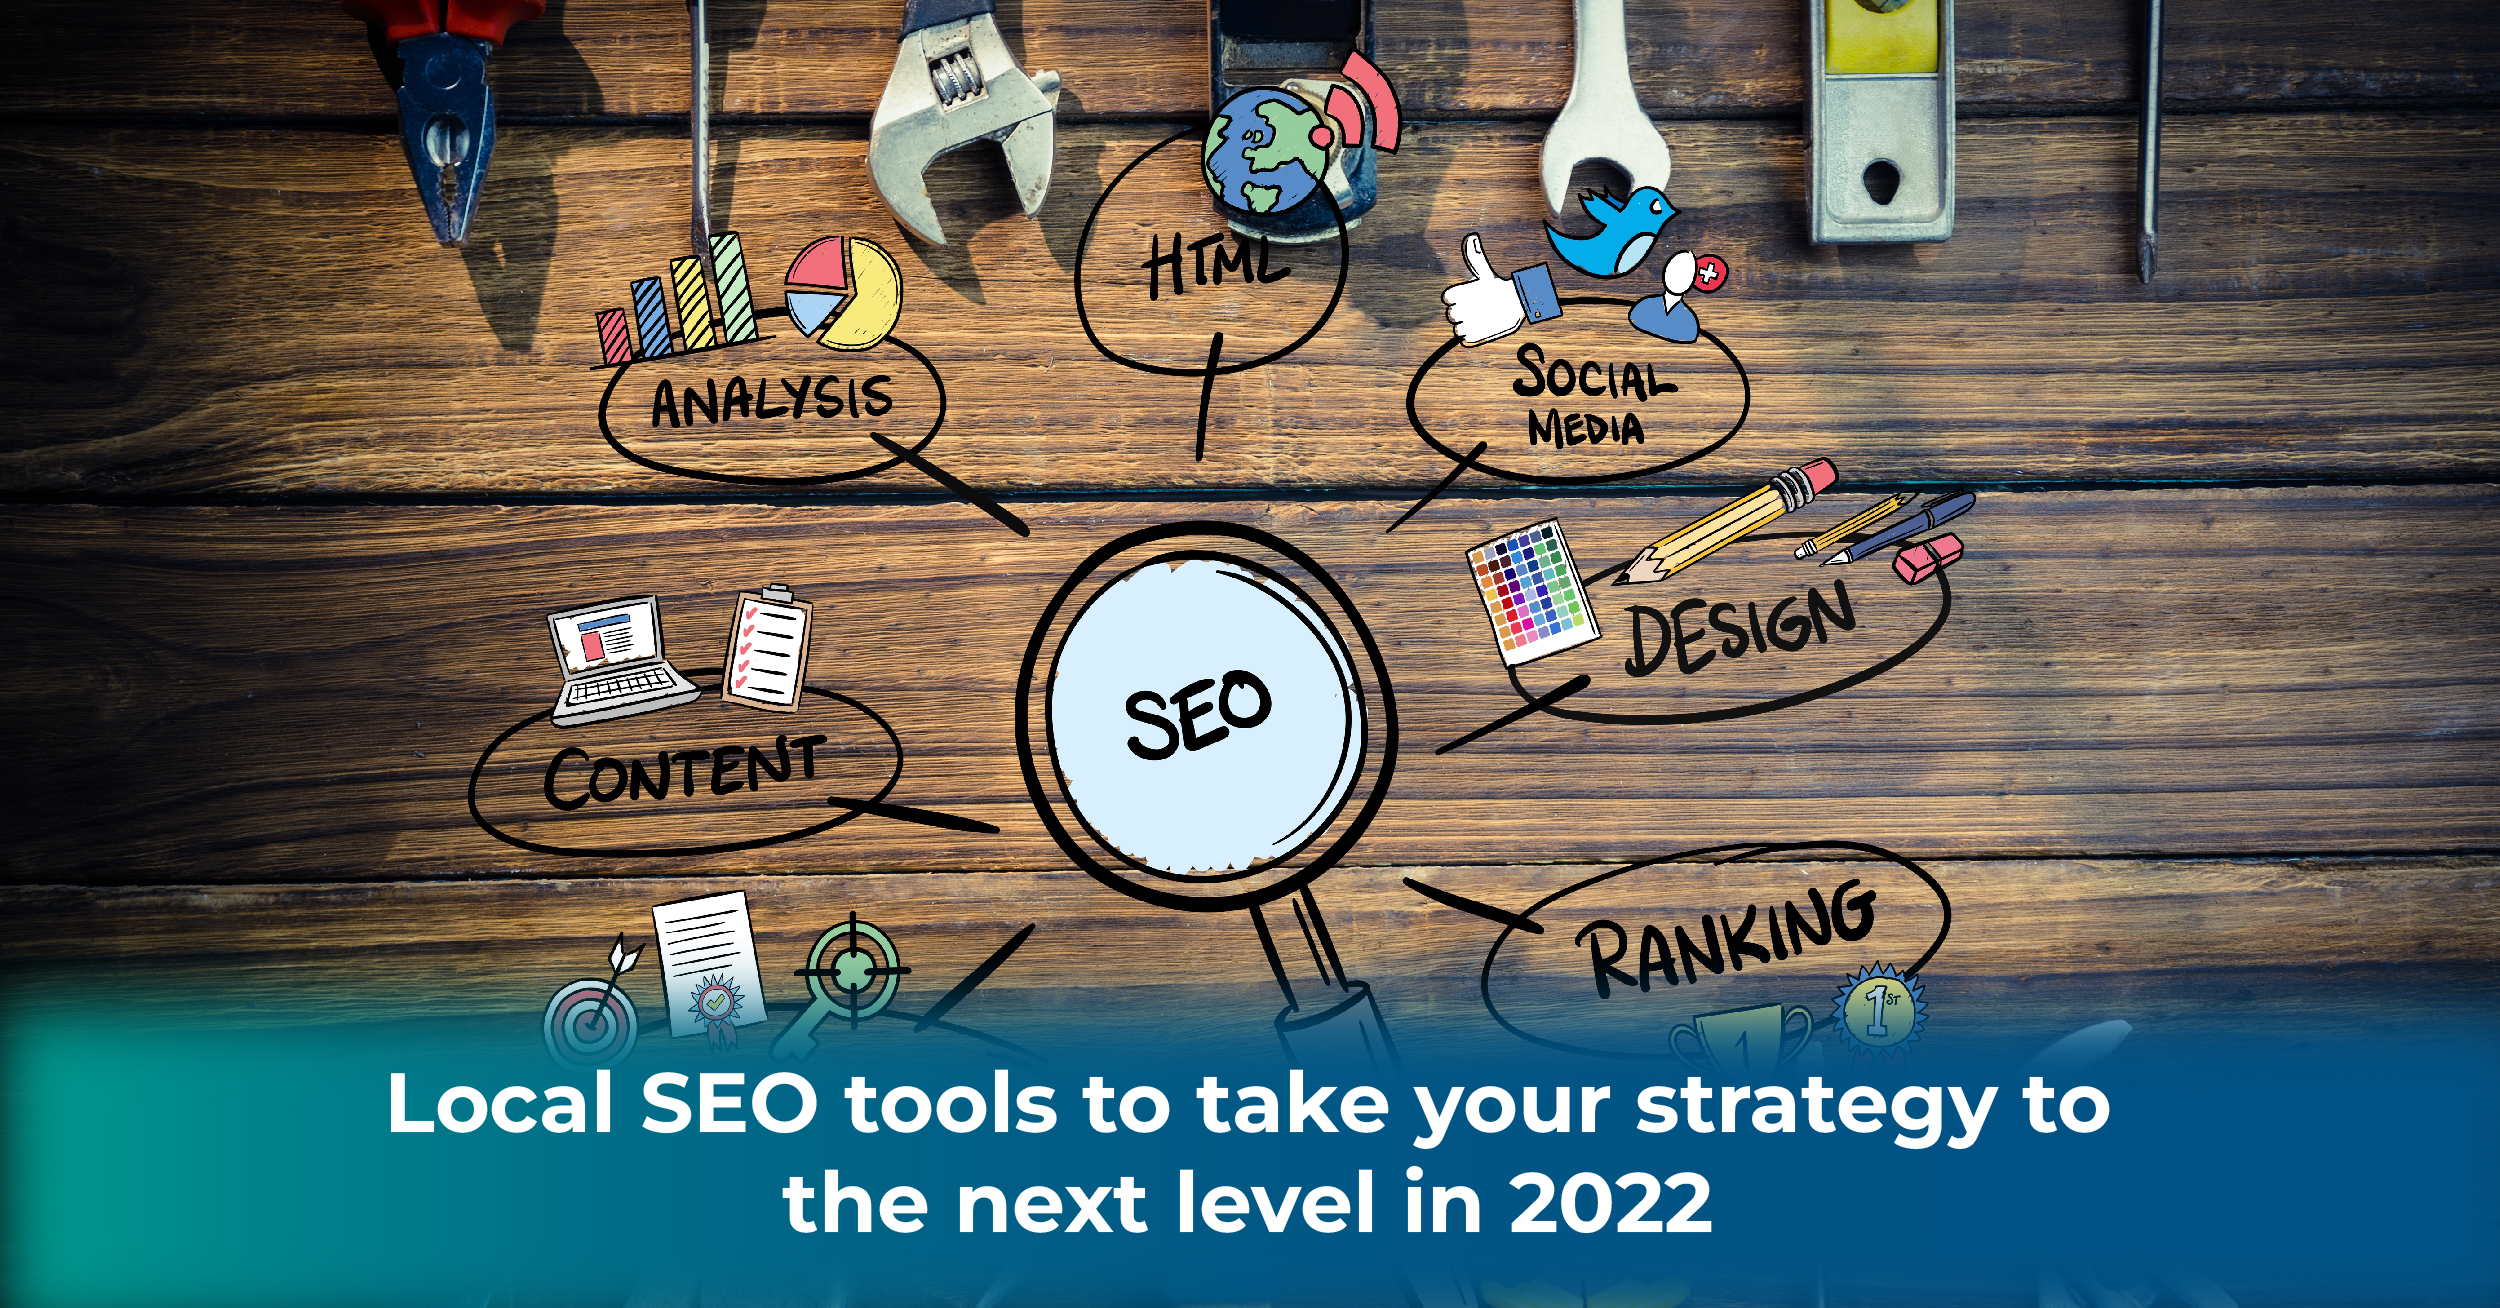 Local SEO tools to take your strategy to the next level in 2022